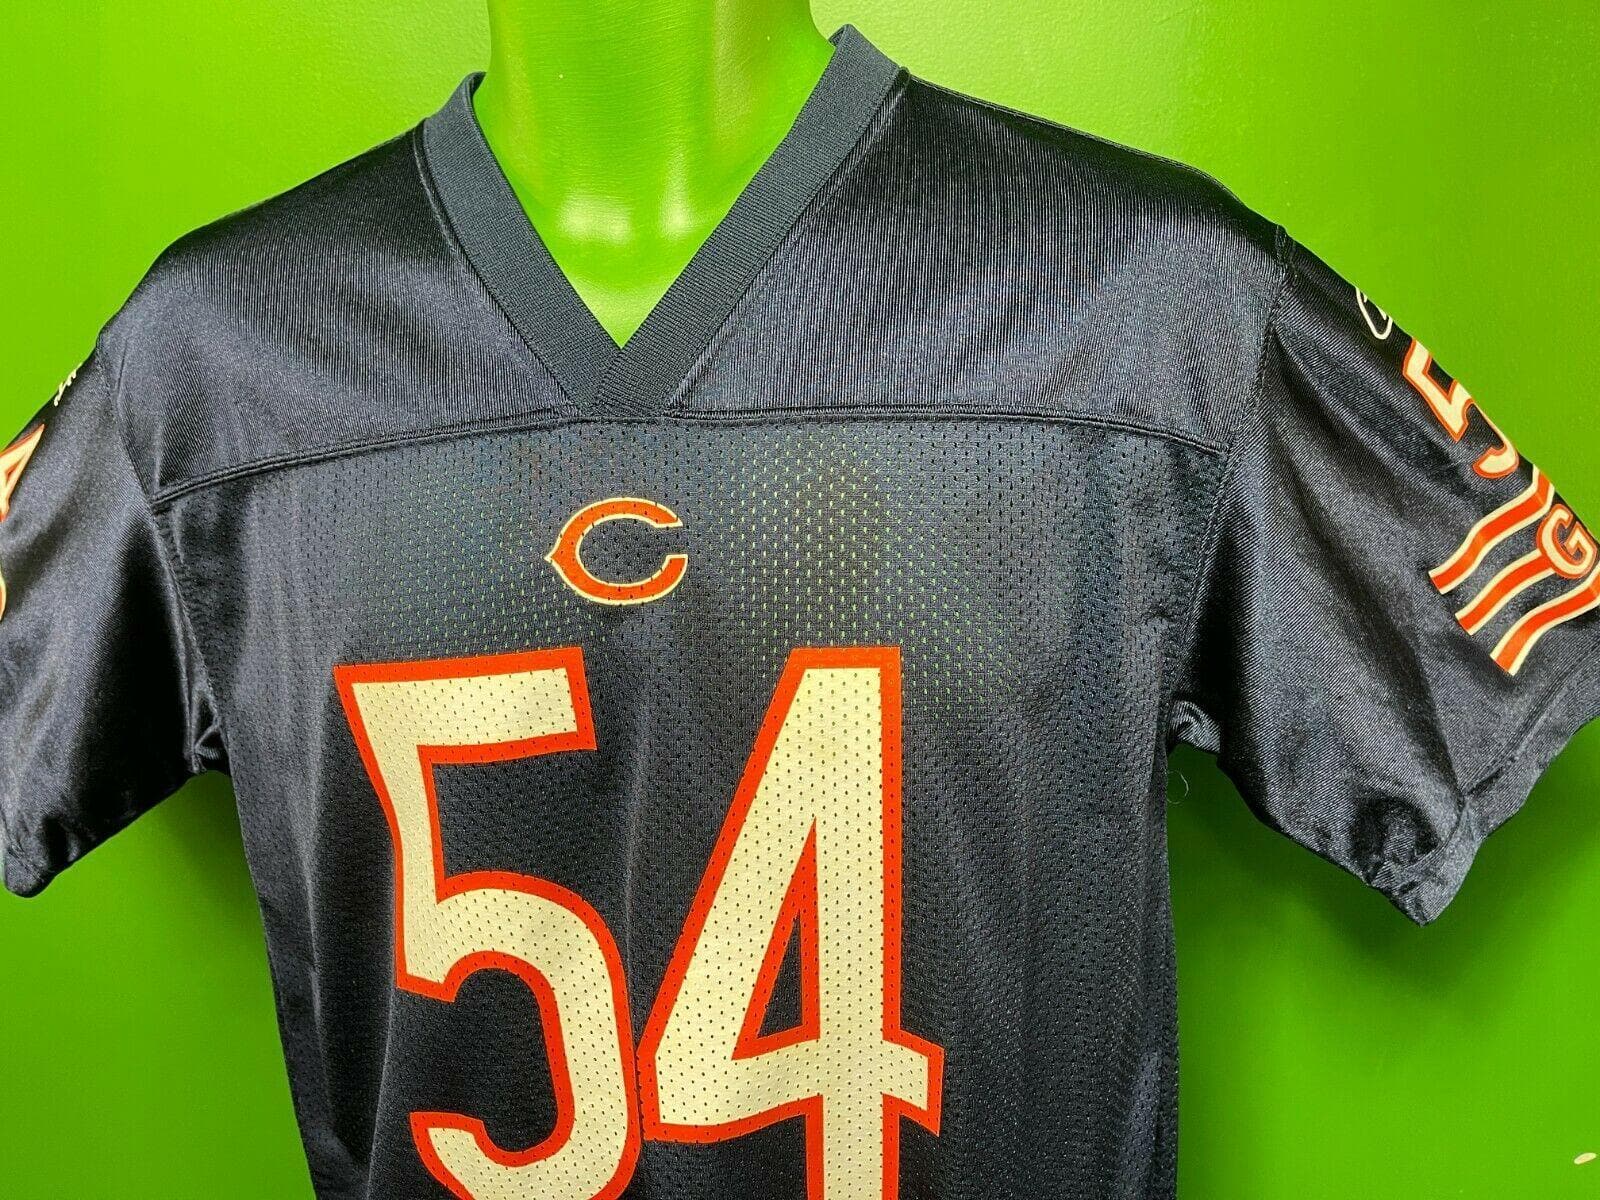 NFL Chicago Bears Brian Urlacher #54 Reebok Jersey Youth Large 14-16